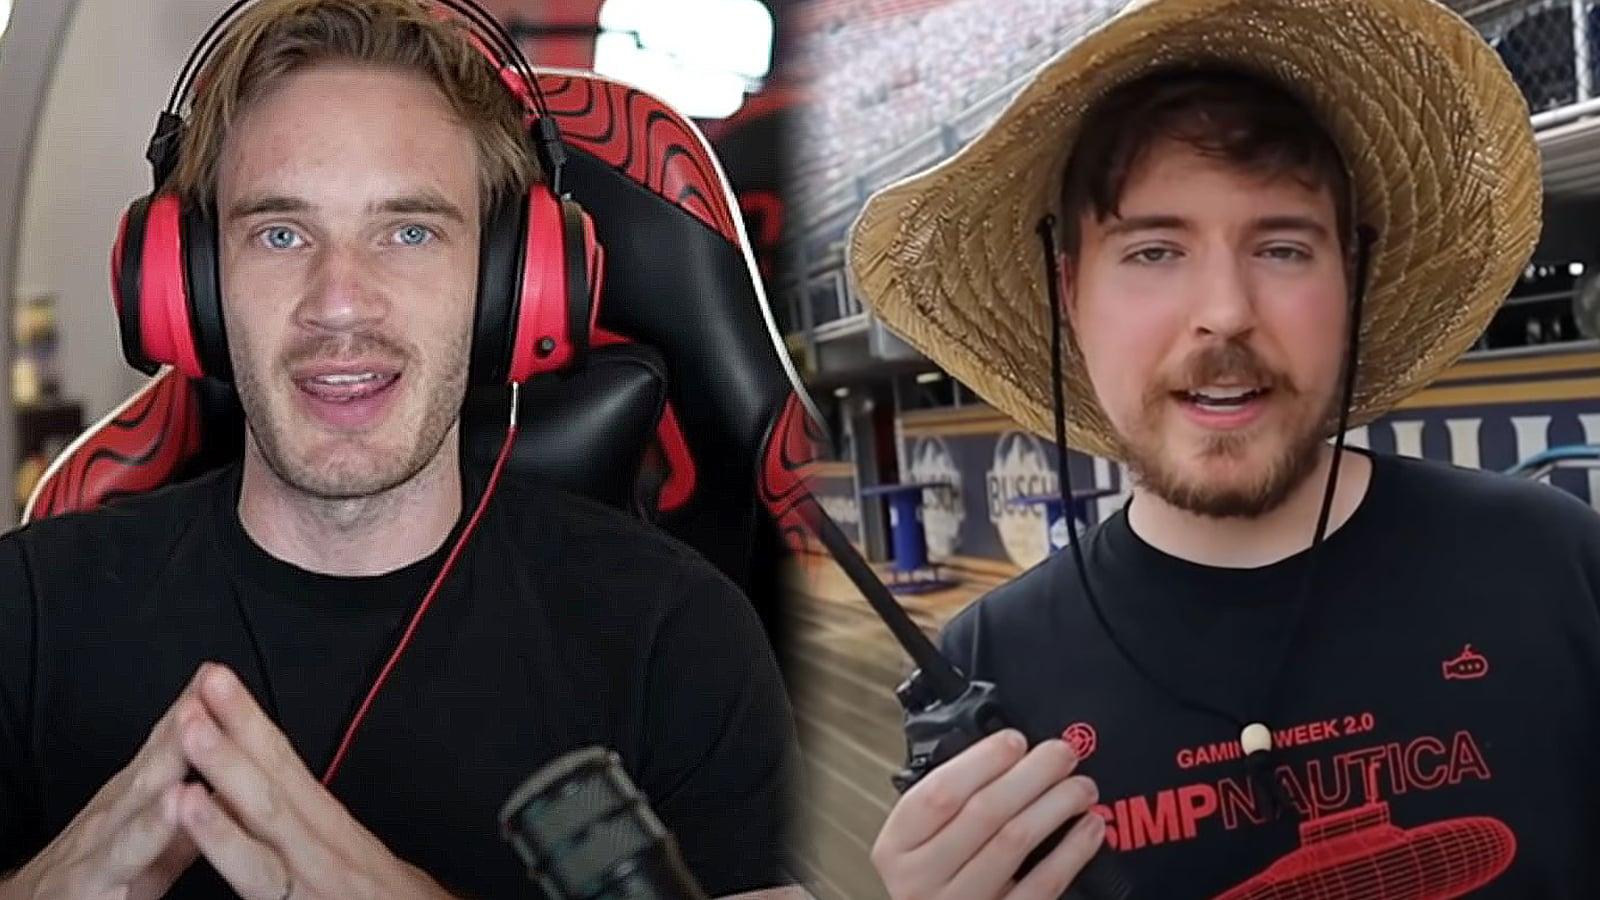 PewDiePie hits back at claims he makes more than MrBeast